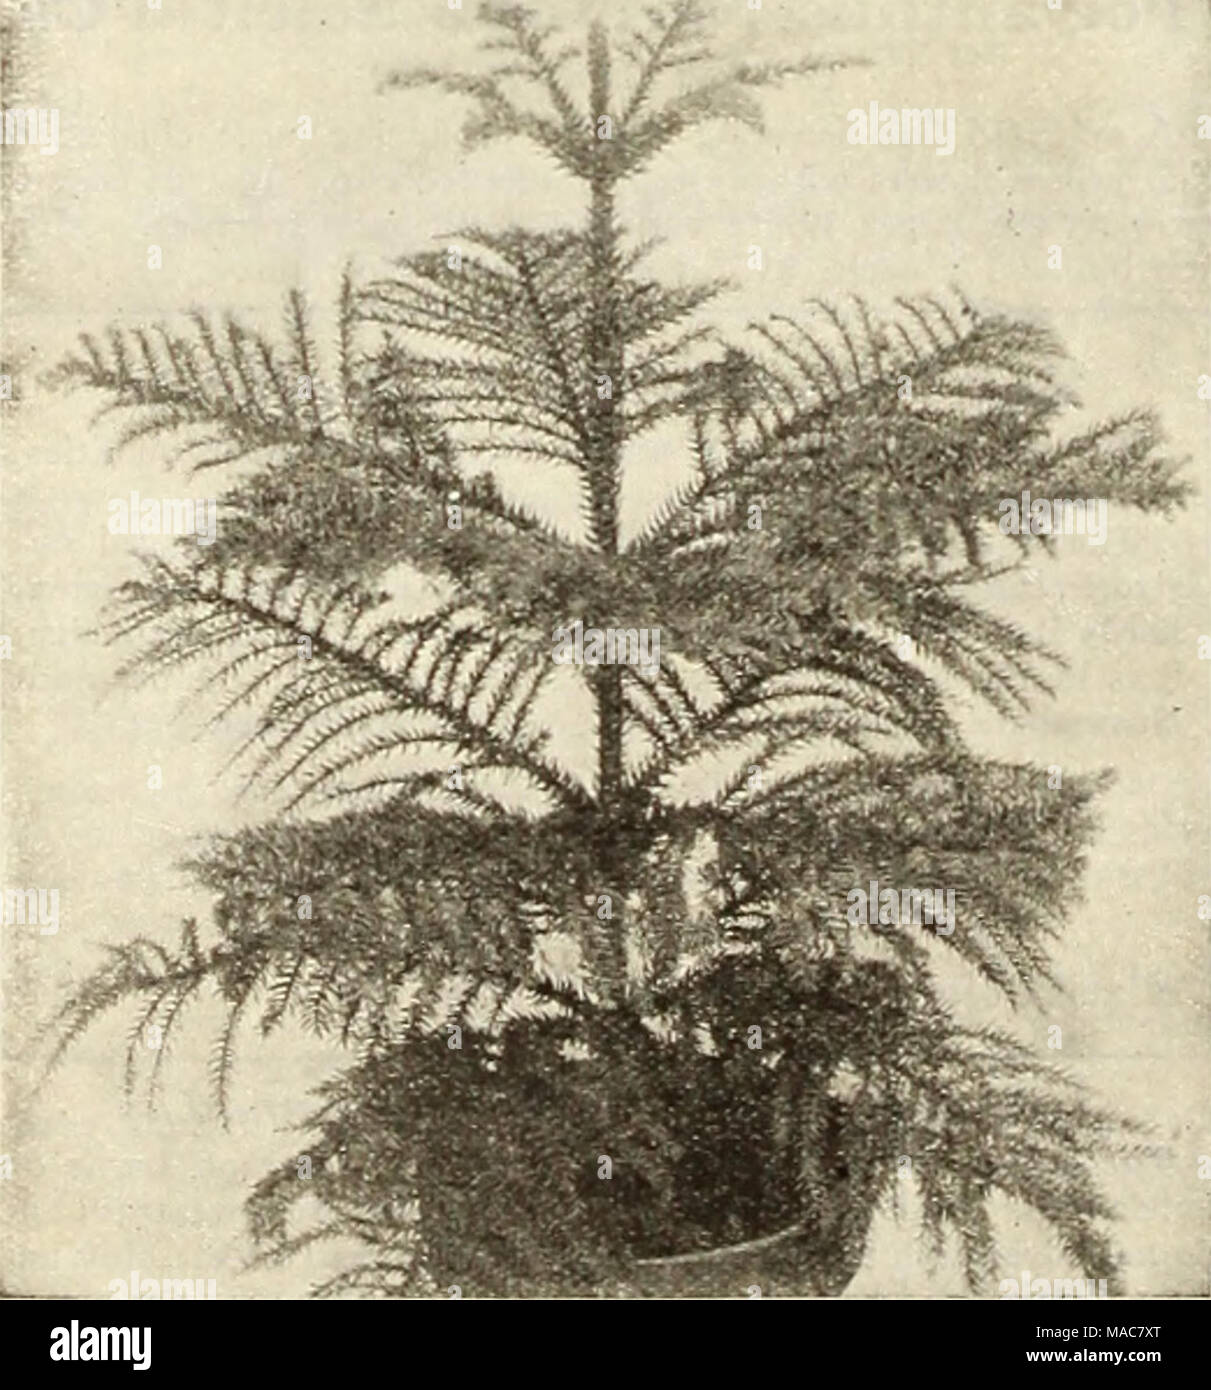 . Dreer's midsummer list 1934 . Araucaria excelsa Araucaria—Nor/offe Island Pine Excelsa. A beautiful tender evergreen, unequaled in symmet rical habit of growth by any other plant. A favorite for house decoration during the winter and for the porch in summer time. 4-inch pots, $2.00; 5-inch pots, $2.50 each. Asparagus Plumosus nanus {Asparagus Fern). There is no better plant for table decoration than this. The foliage is more delicate than that of the finest Fern, being lace-like in its filminess. A plant with half a dozen stalks is a mass of dainty, misty green. 5-inch pots, 50c each. Aspidi Stock Photo